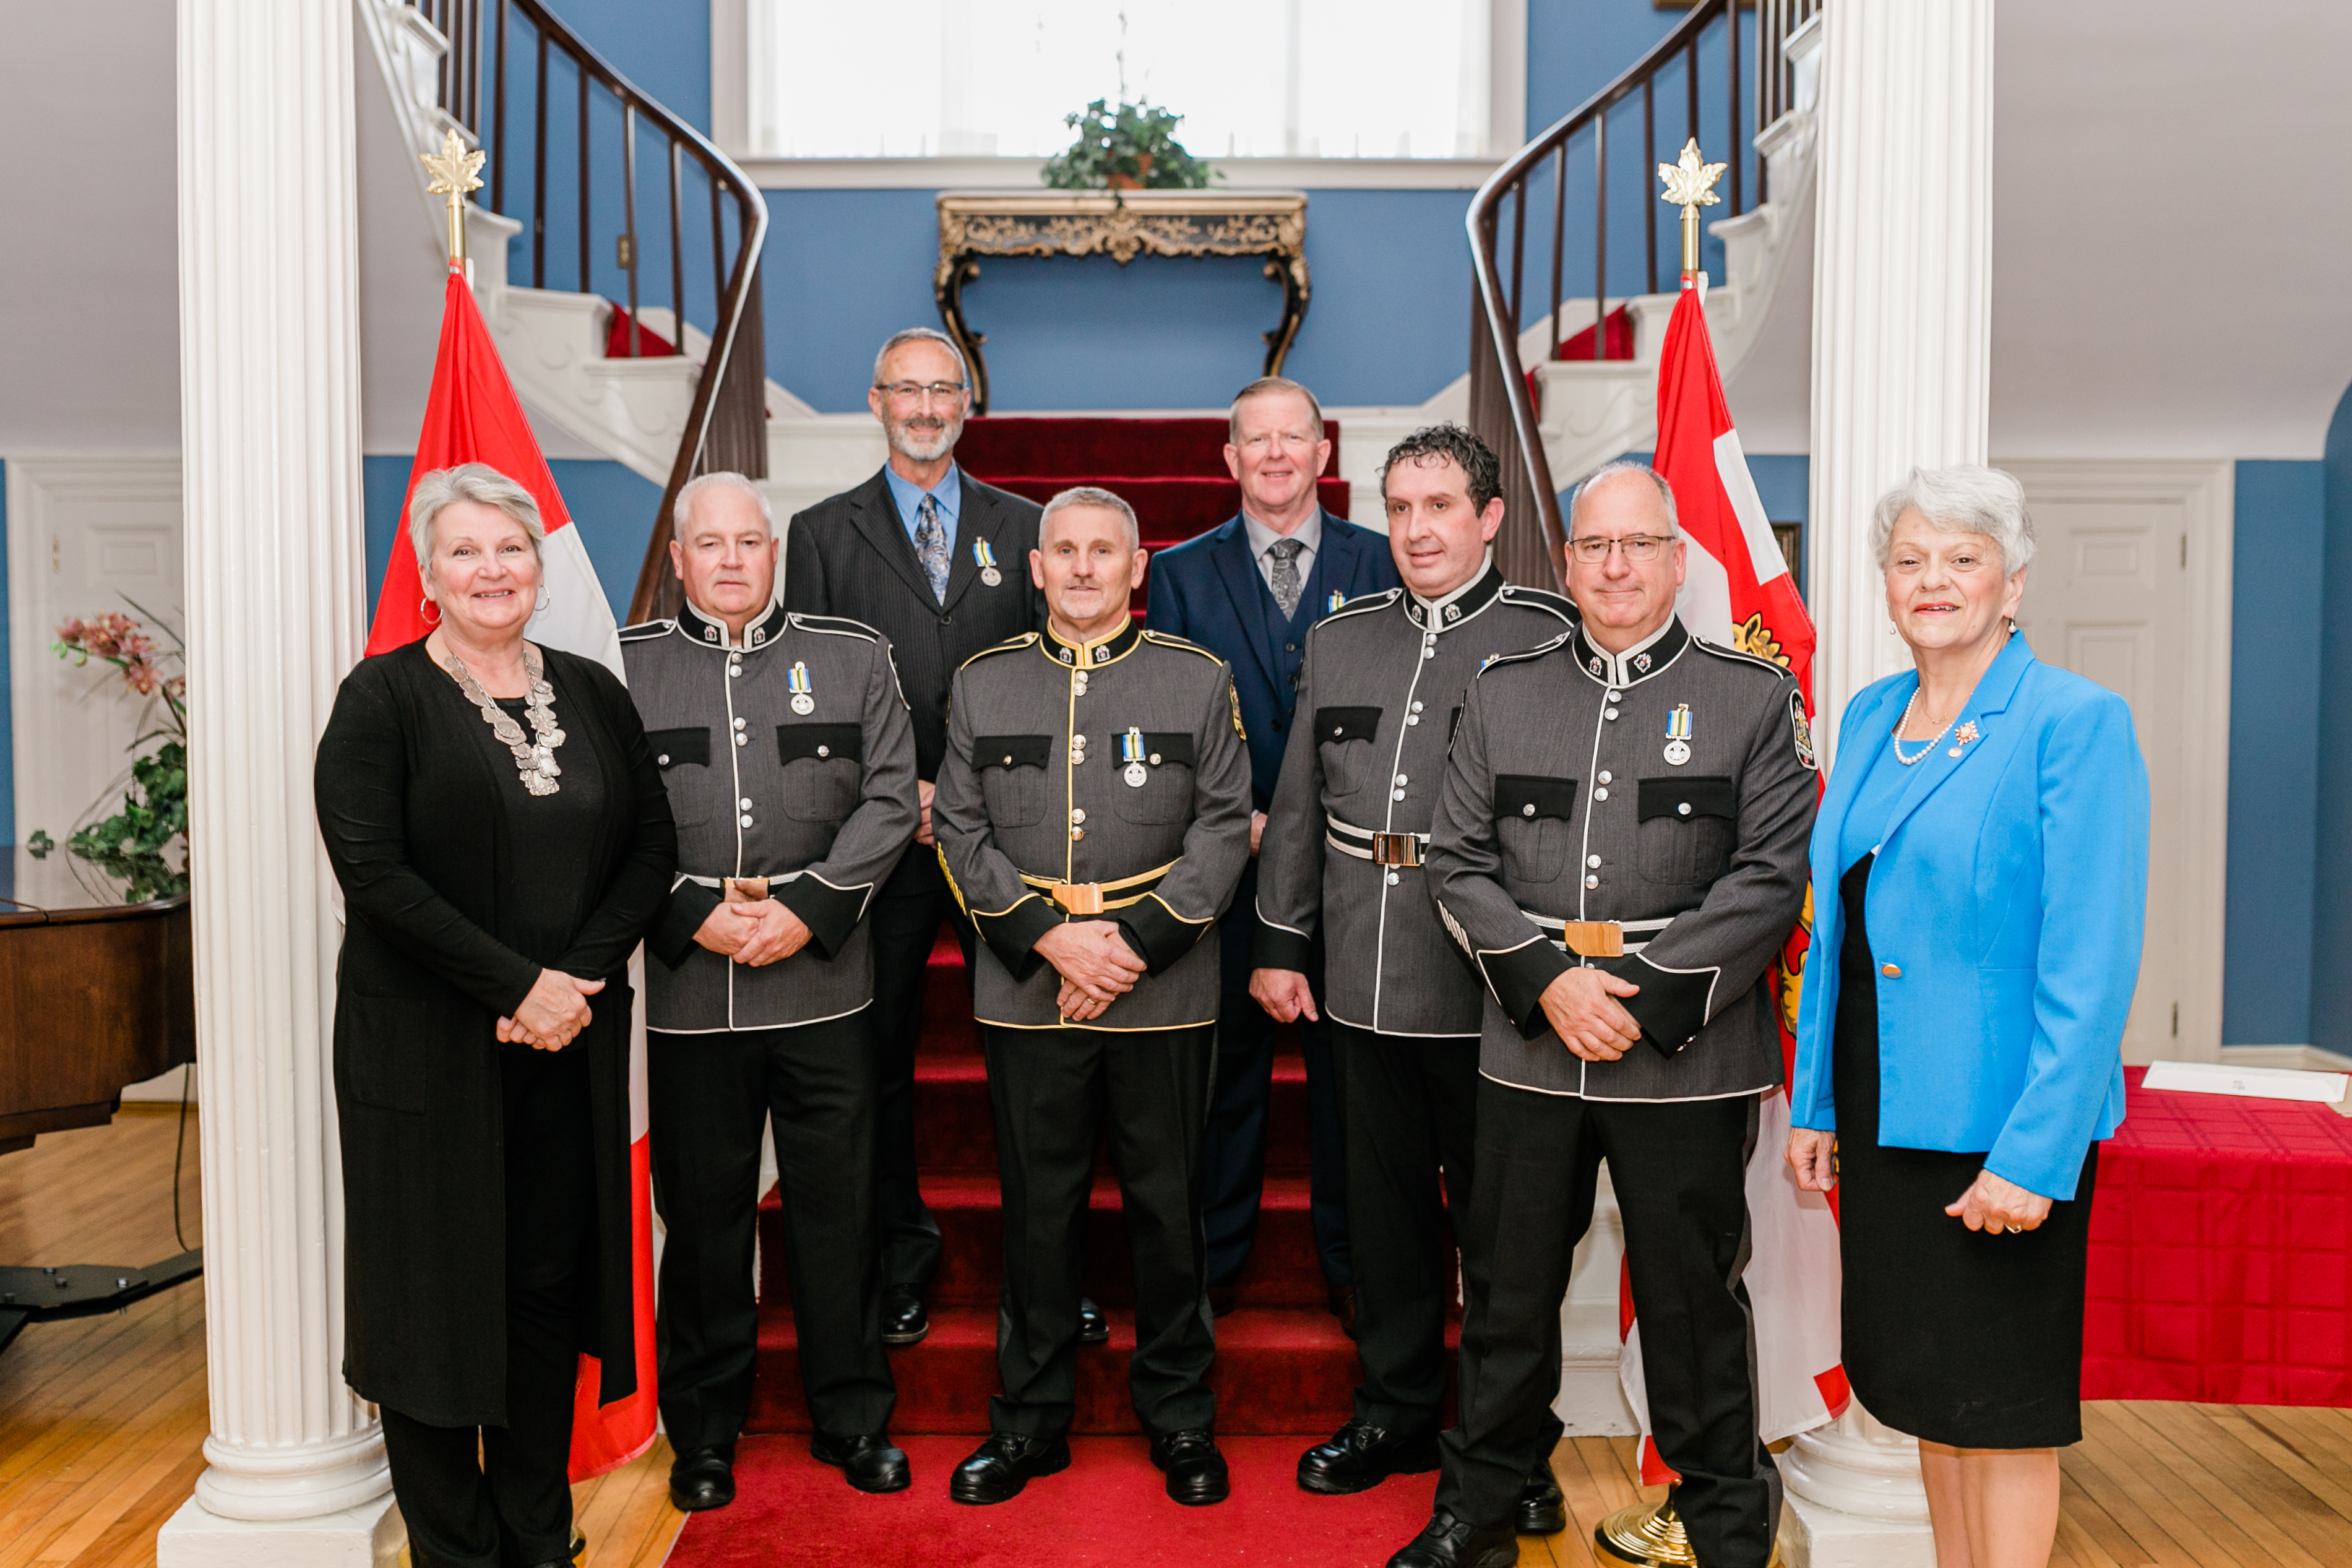 Her Honour with Peace Officers